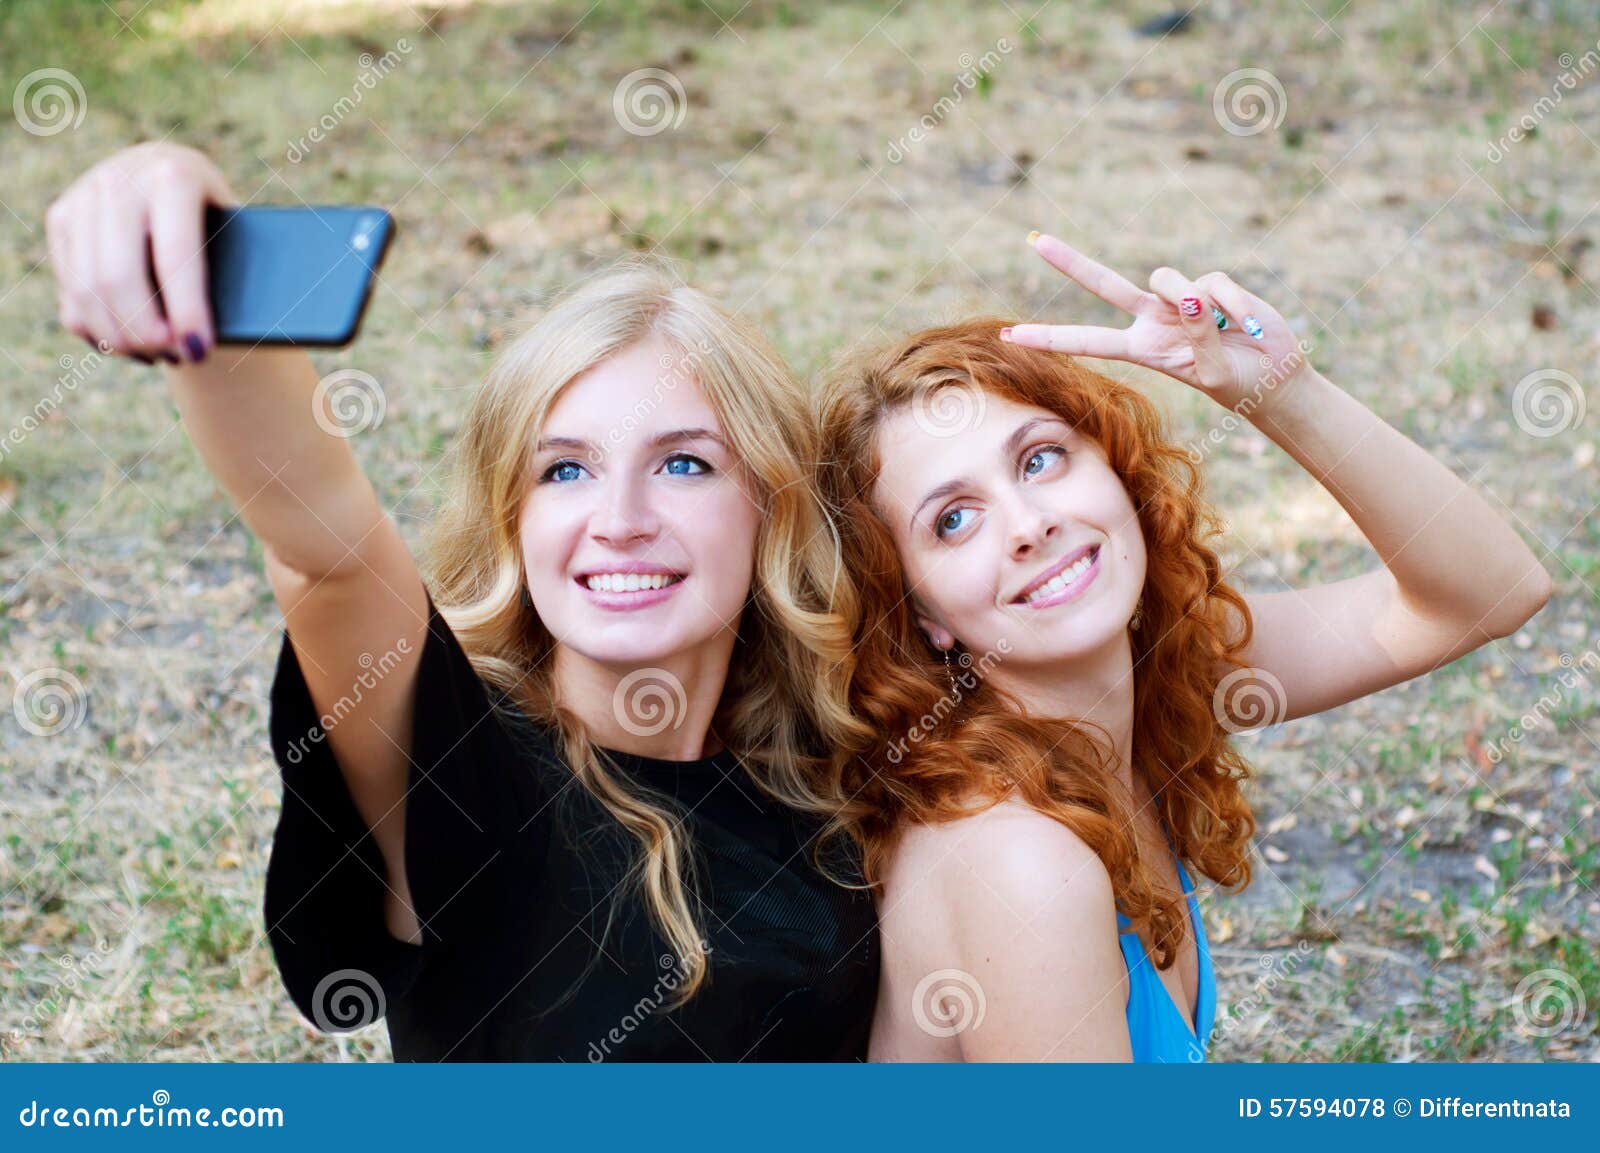 Two Girlfriends Taking A Selfie Stock Photo - Image: 57594078